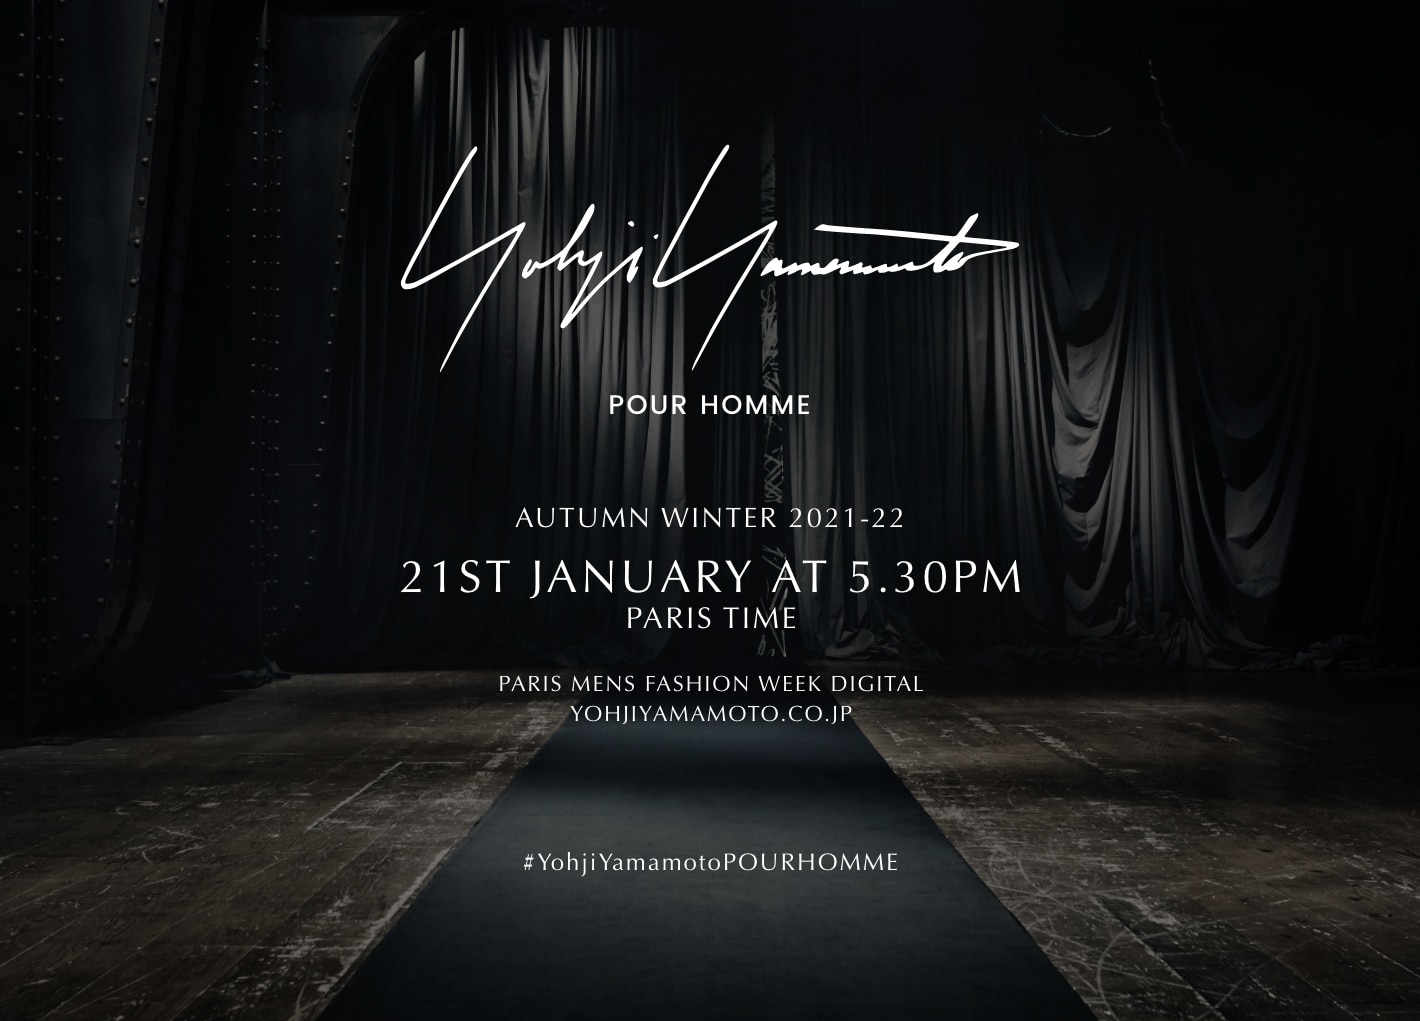 [SAVE THE DATE] Yohji Yamamoto POUR HOMME AW21-22